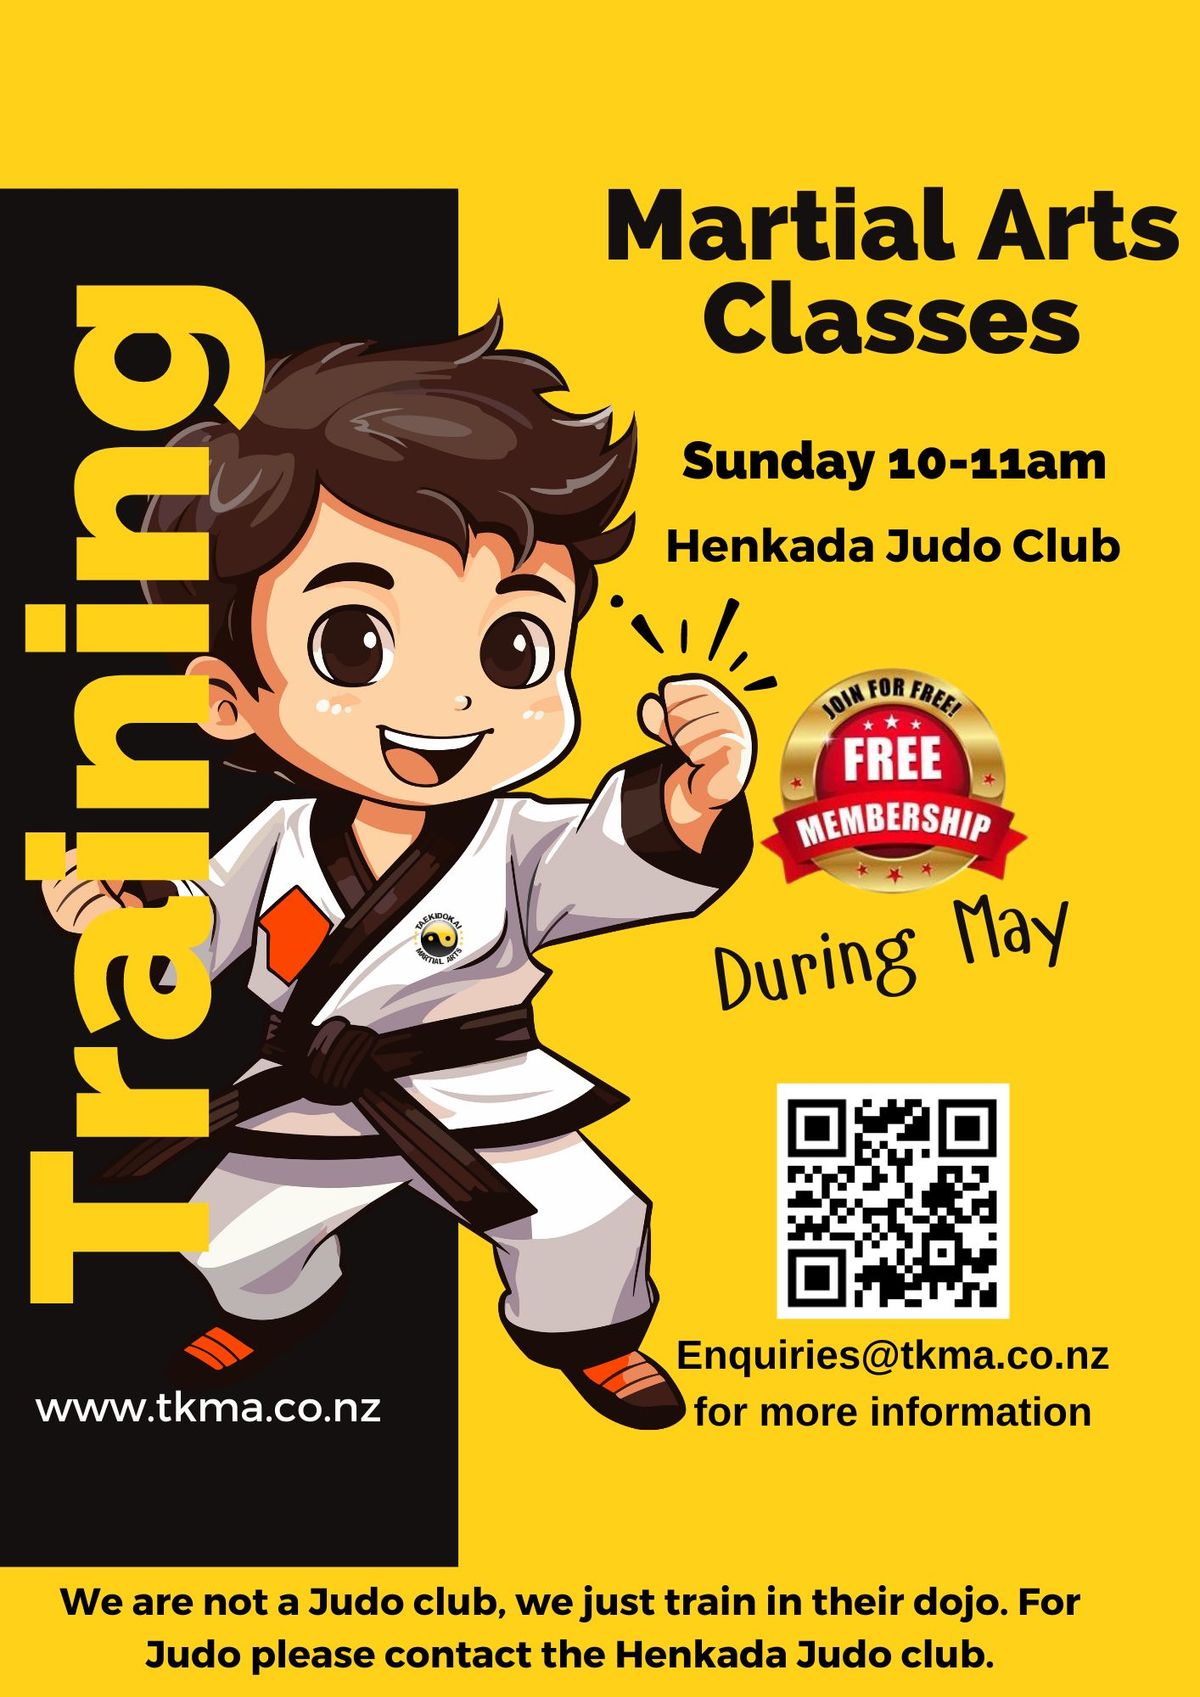 Martial Arts Training for Families